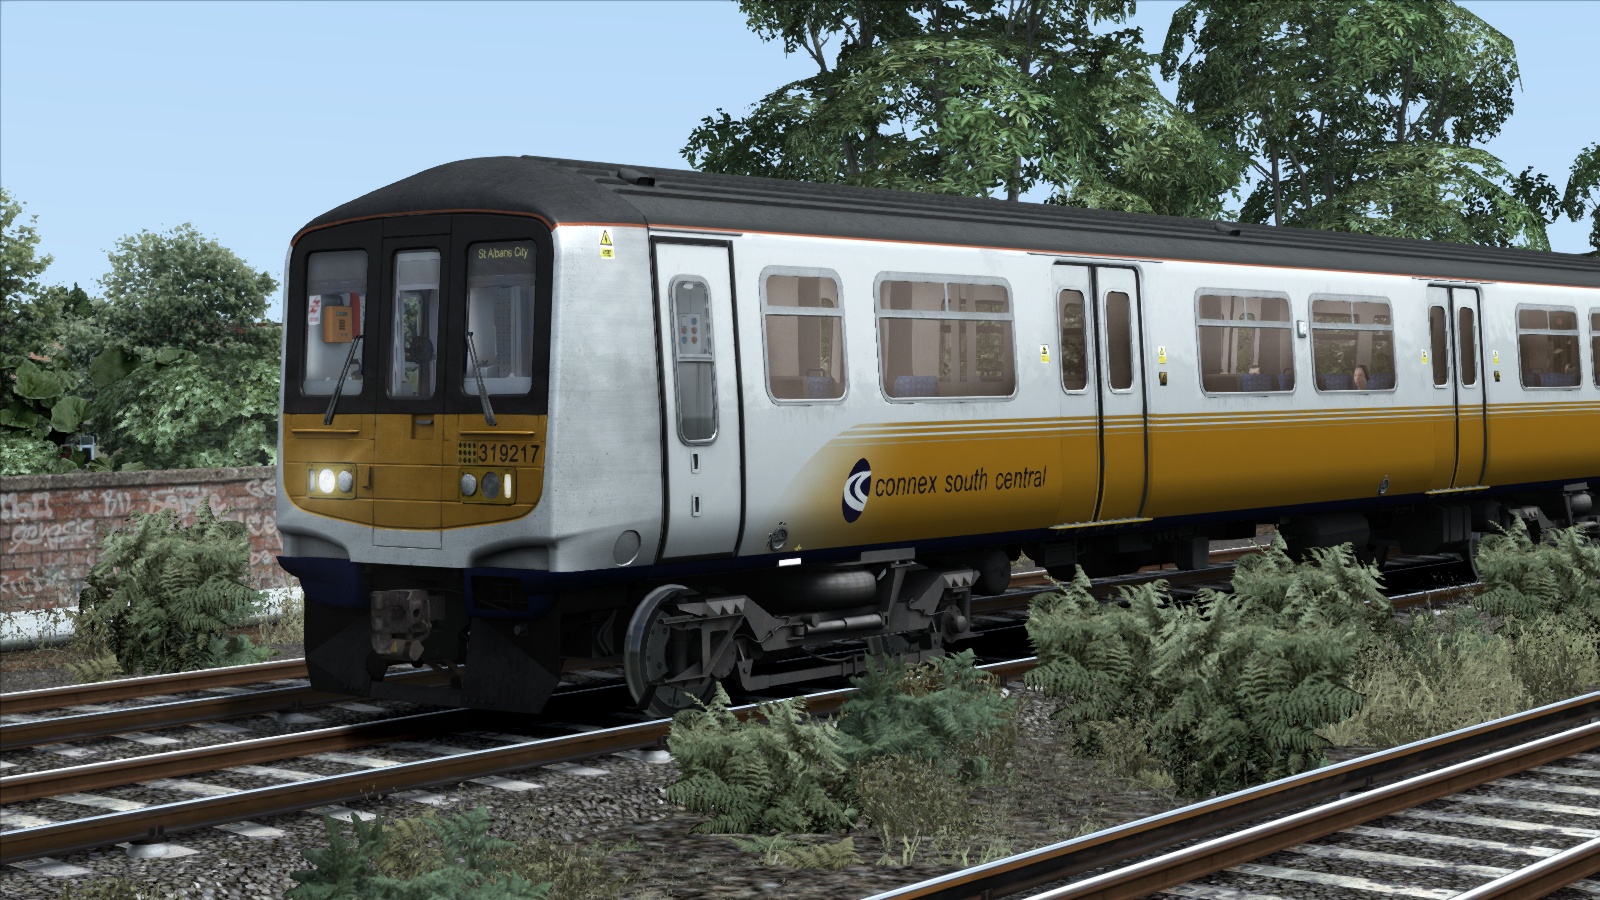 TS Marketplace: Connex South Central Class 319 Livery Add-On Featured Screenshot #1